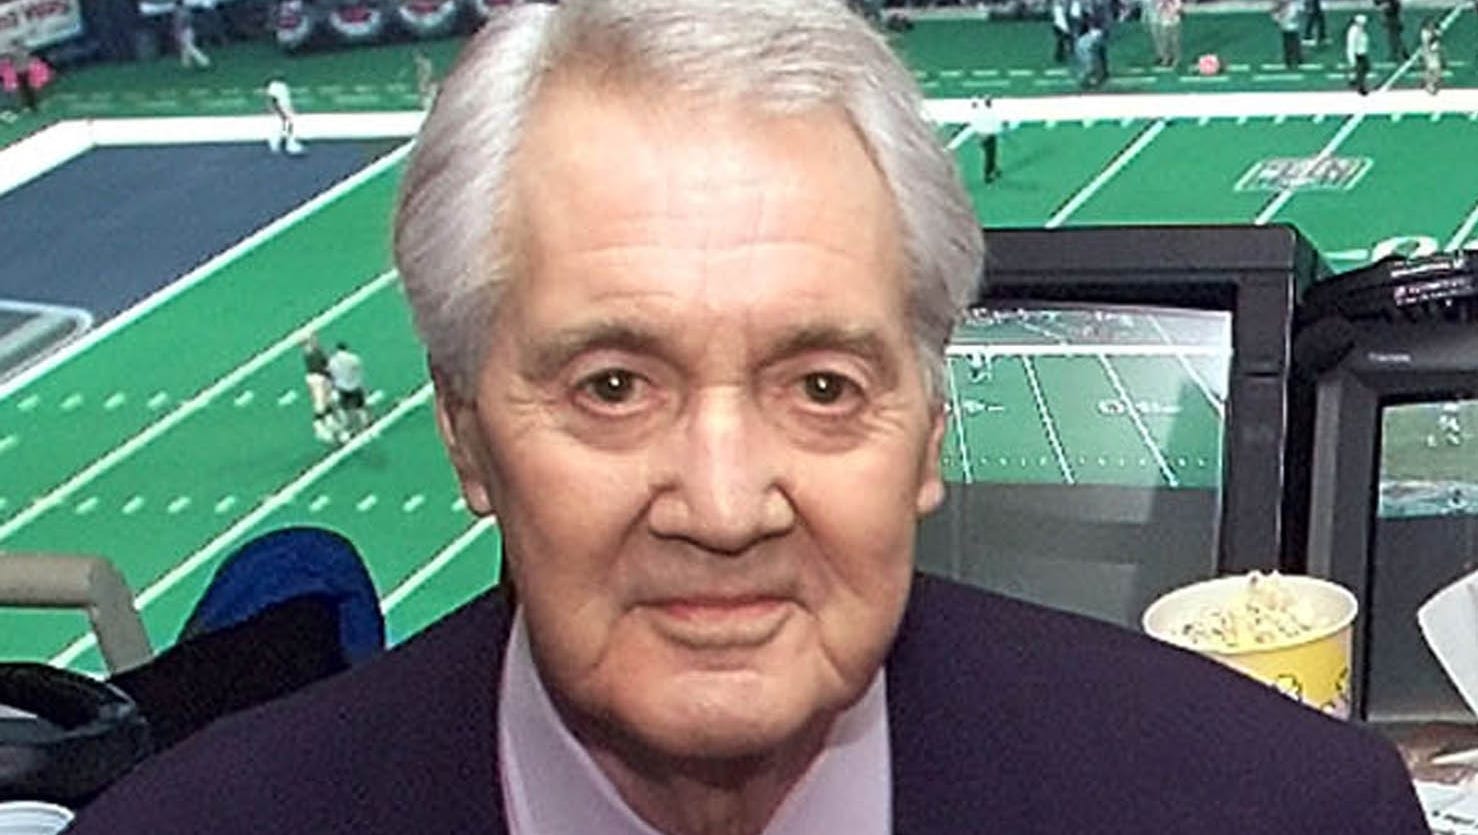 Pat Summerall Called A Broadcasting Giant Has Died